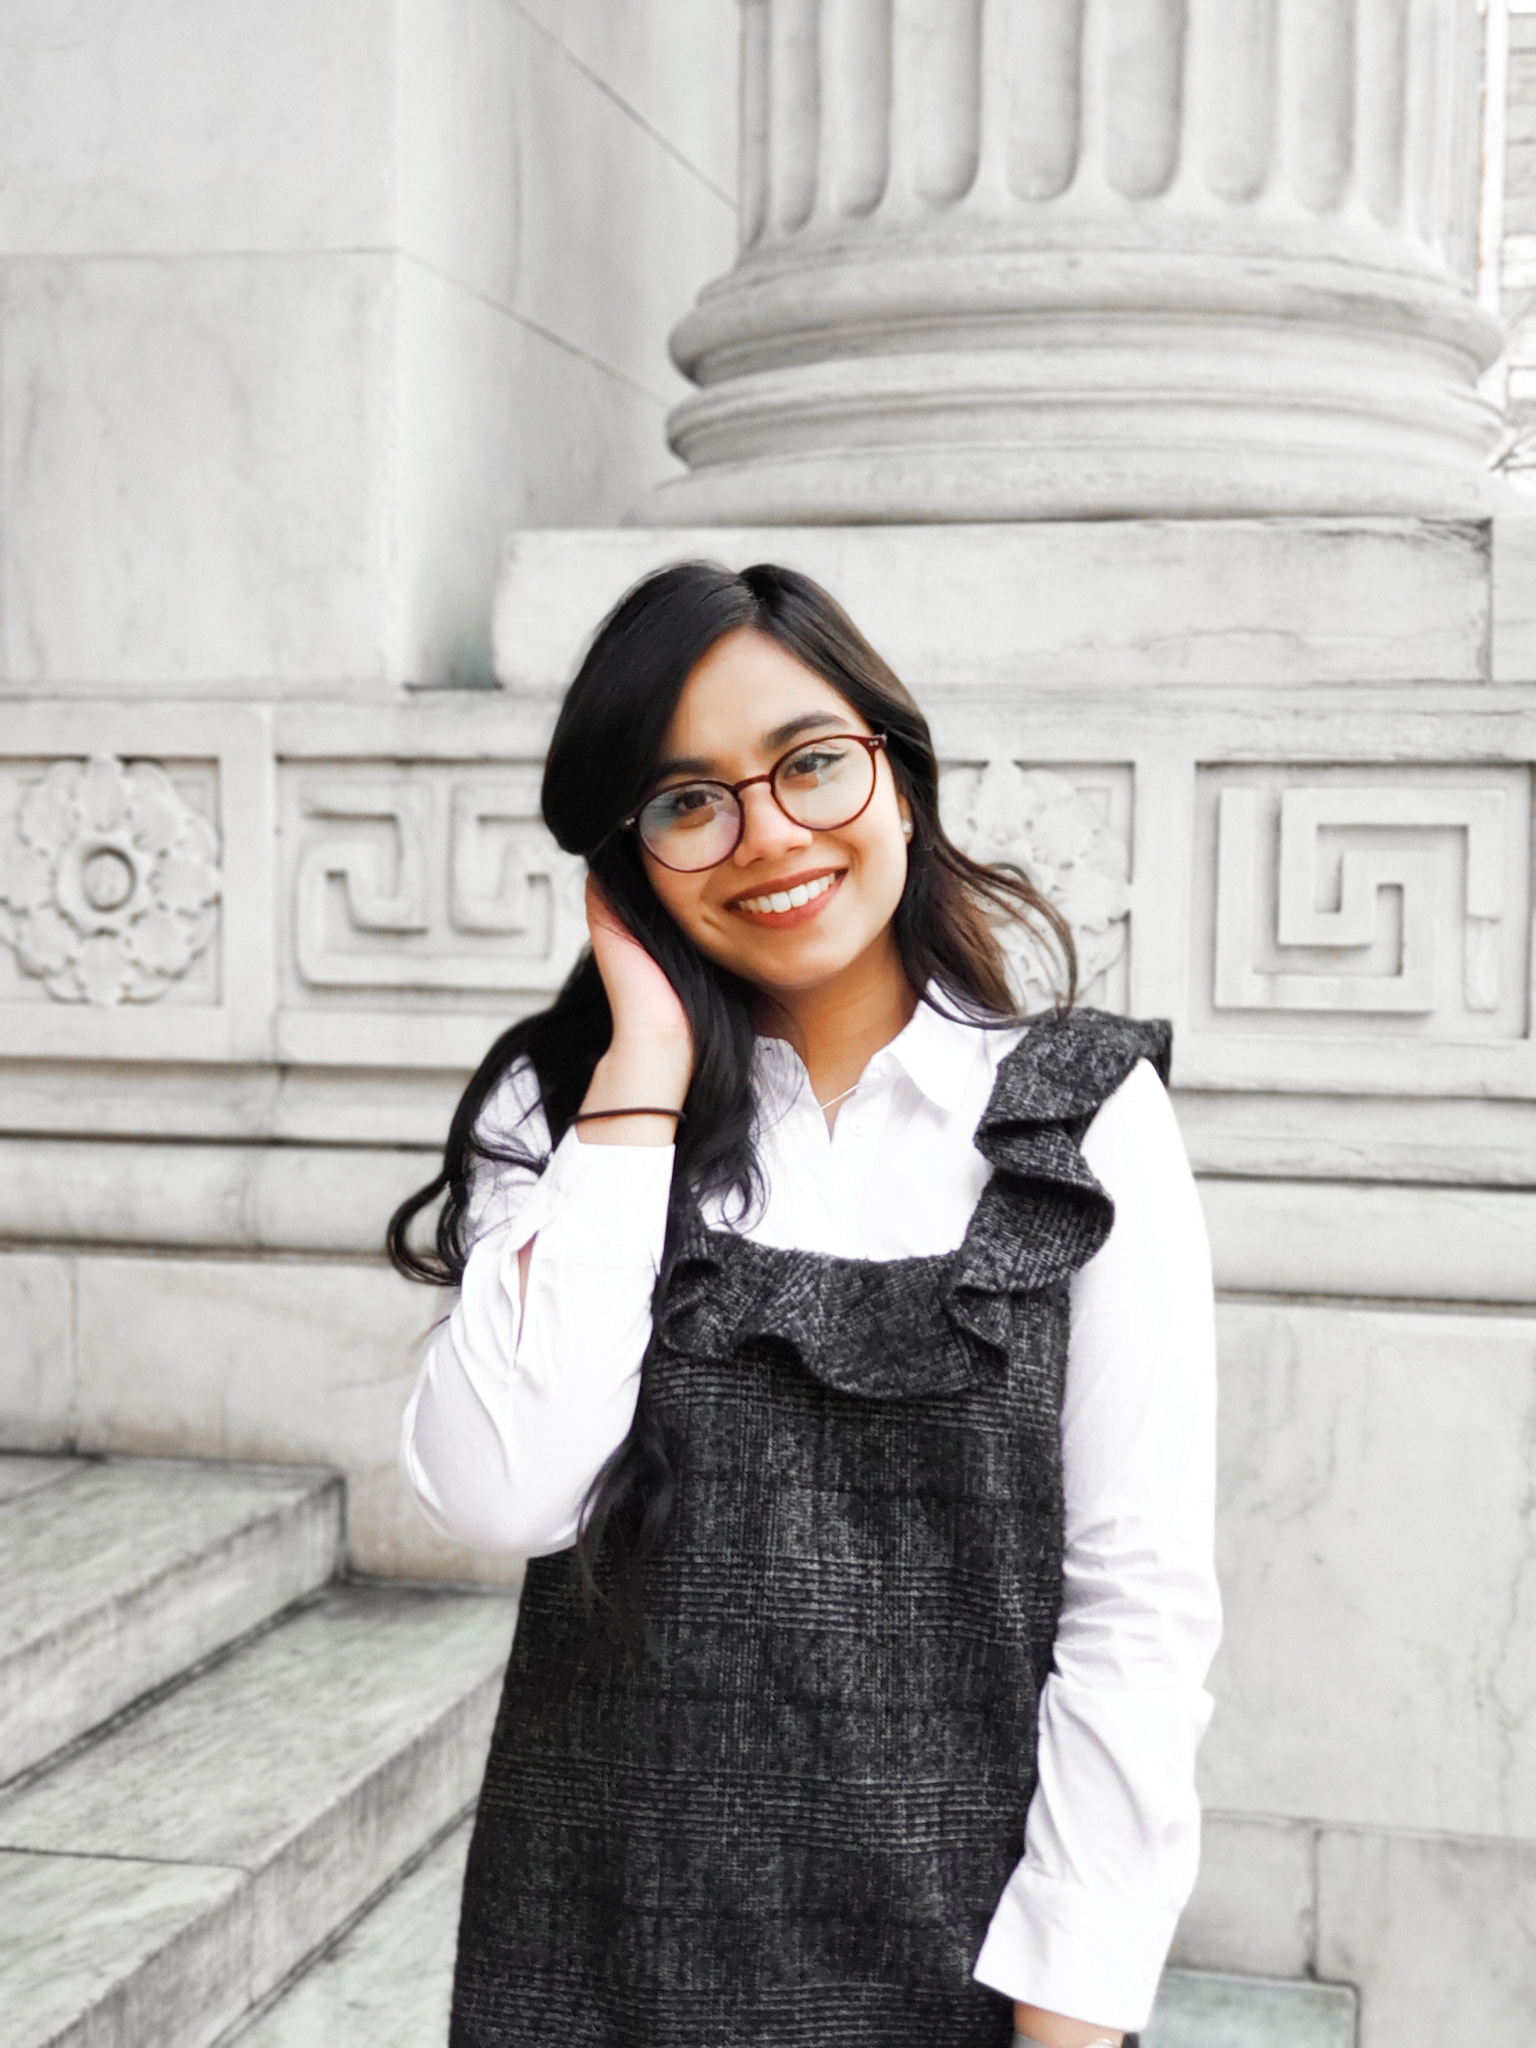 Medical student Qanetha Ahmed standing in New York City